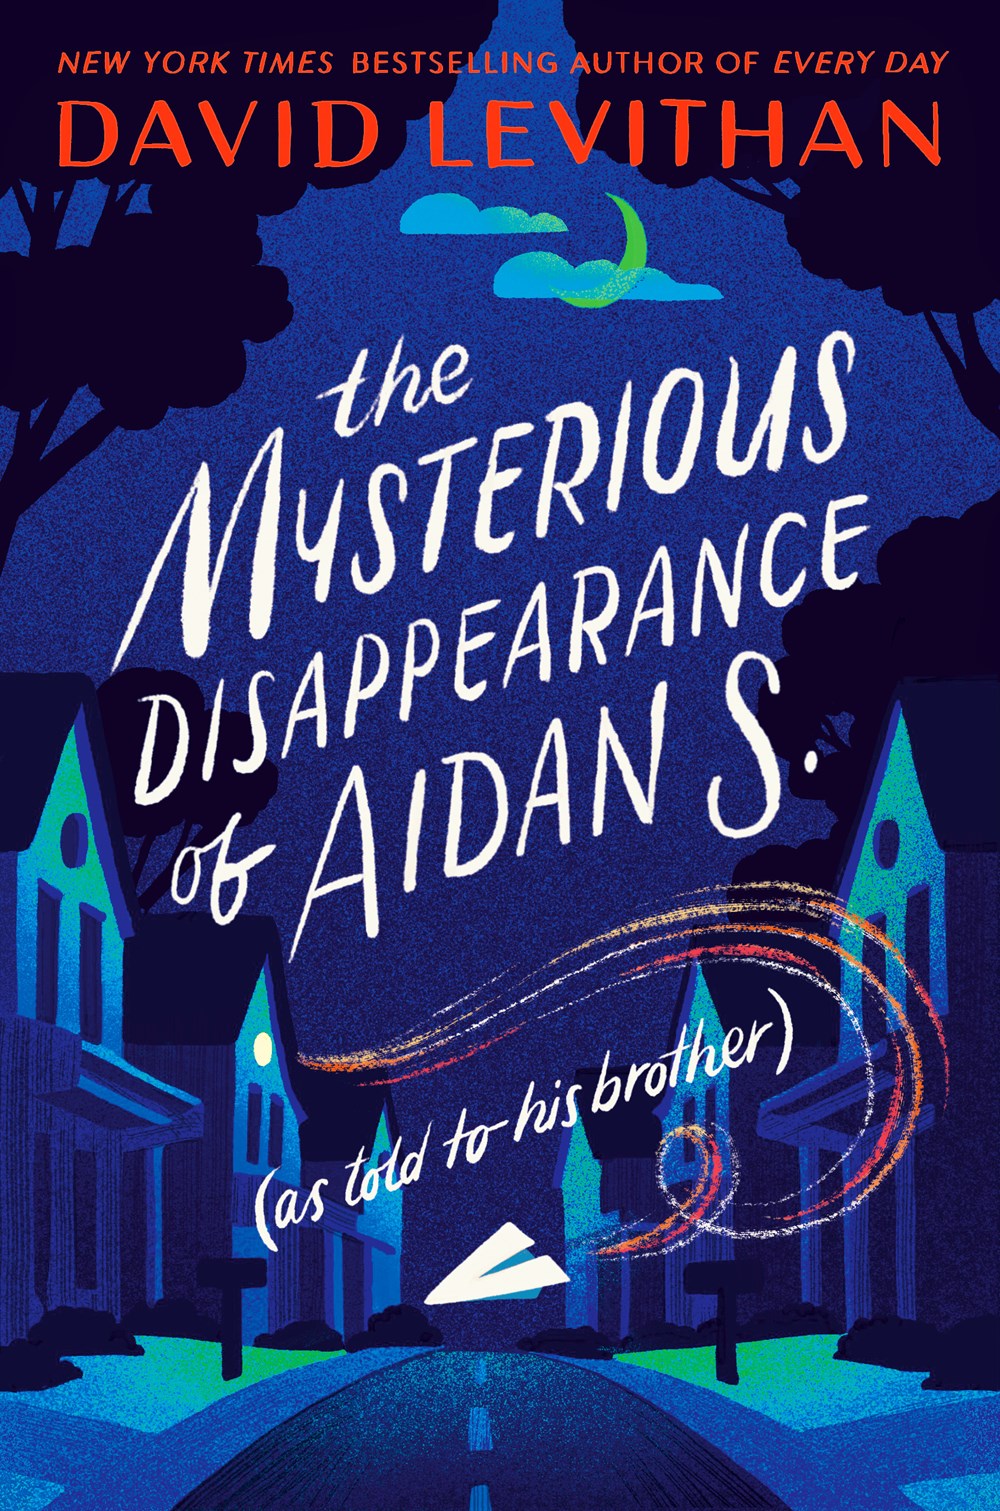 The Mysterious Disappearance of Aidan S. (Hardcover, 2021, Knopf Books for Young Readers)